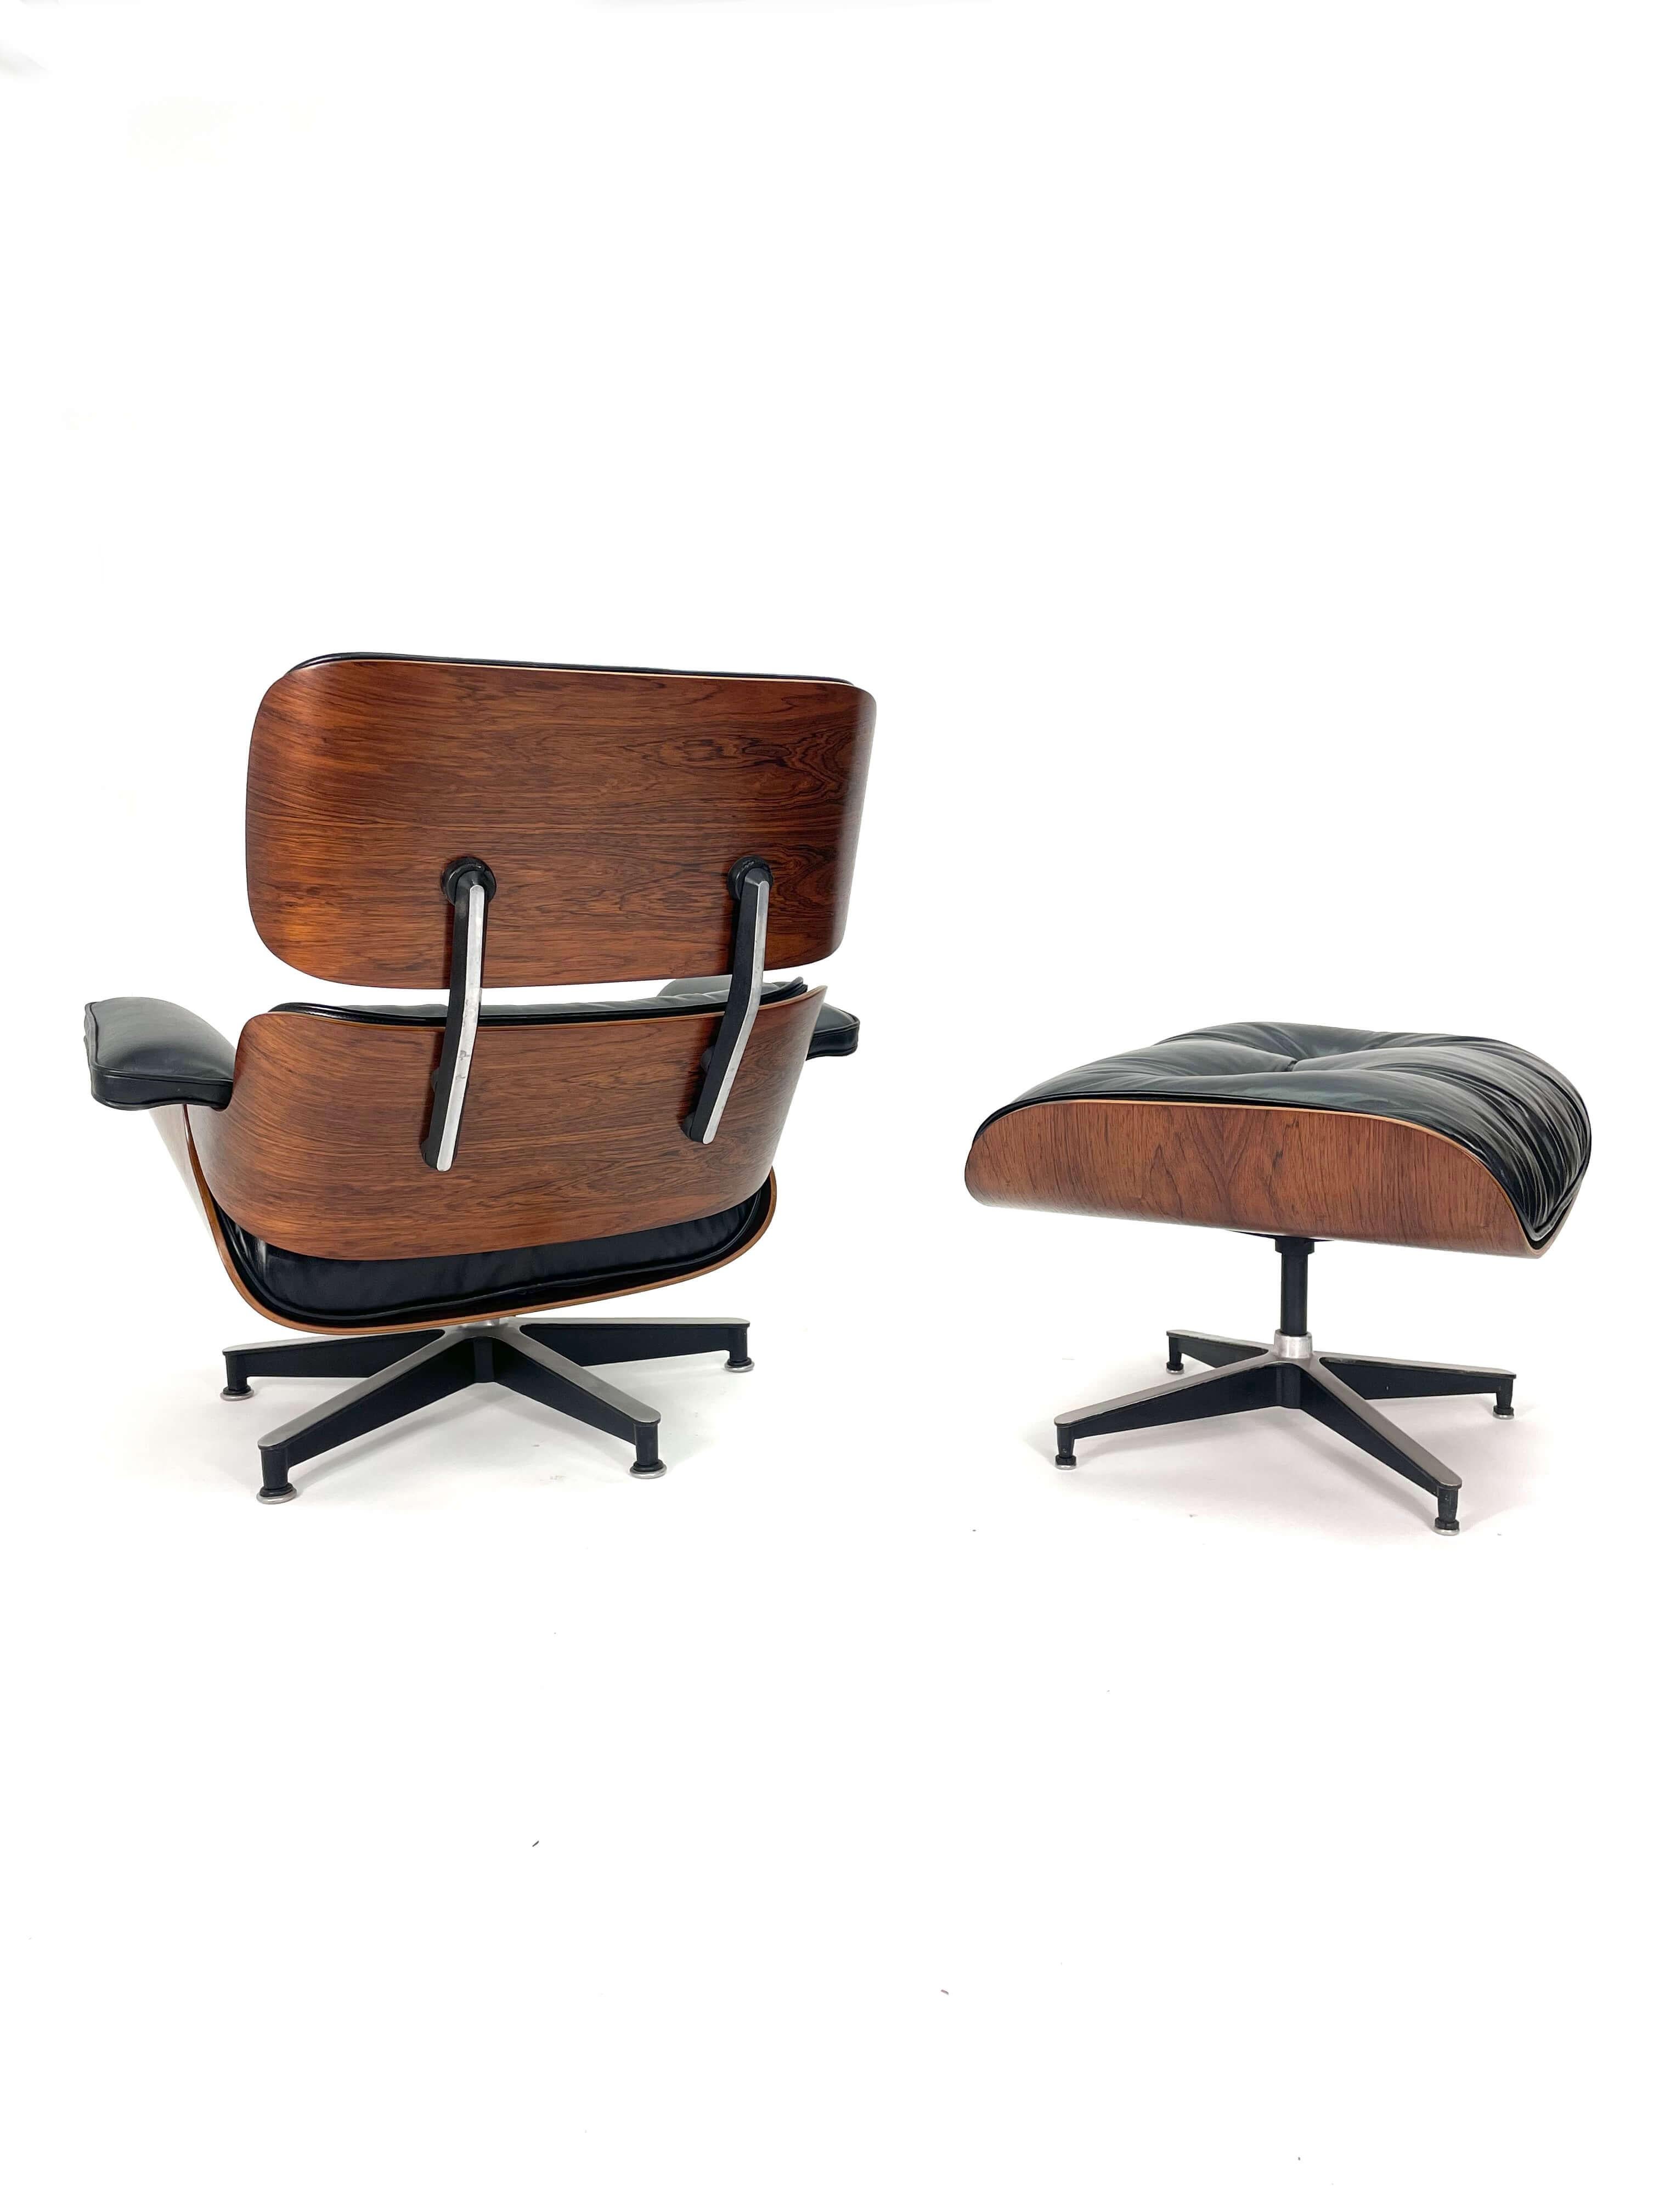 This 1960's Eames Lounge Chair in Rosewood and Ottoman for Herman Miller is a collector's item. This chair was designed to be a refuge from the strains of modern living. This is a vintage chair dating back to the 1960s. We can't pinpoint the exact